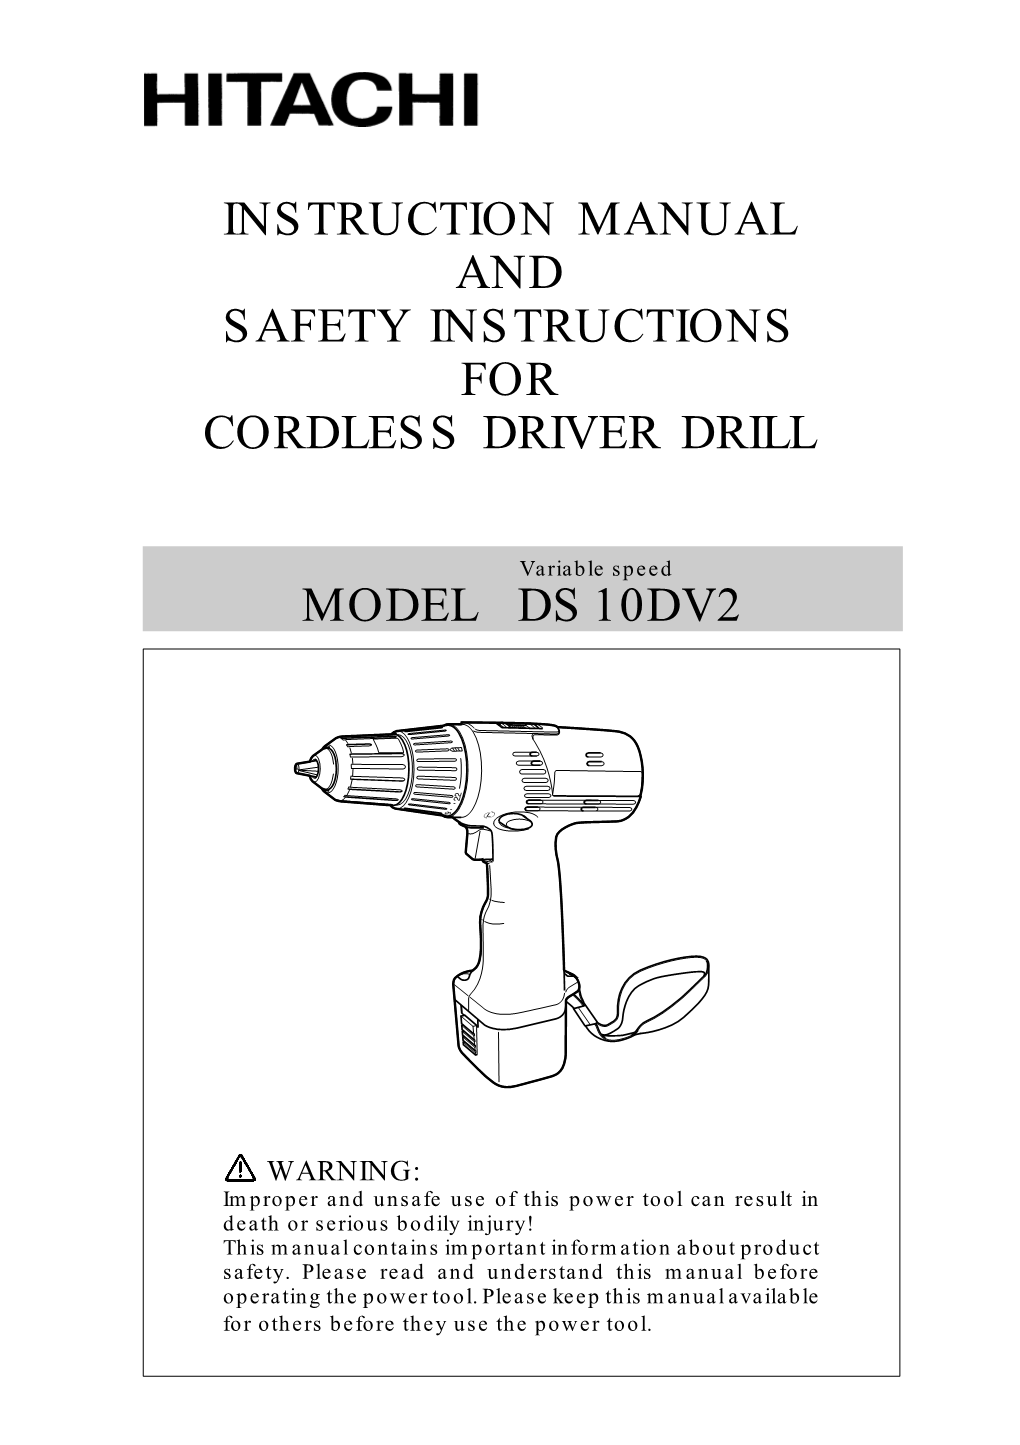 Instruction Manual and Safety Instructions for Cordless Driver Drill